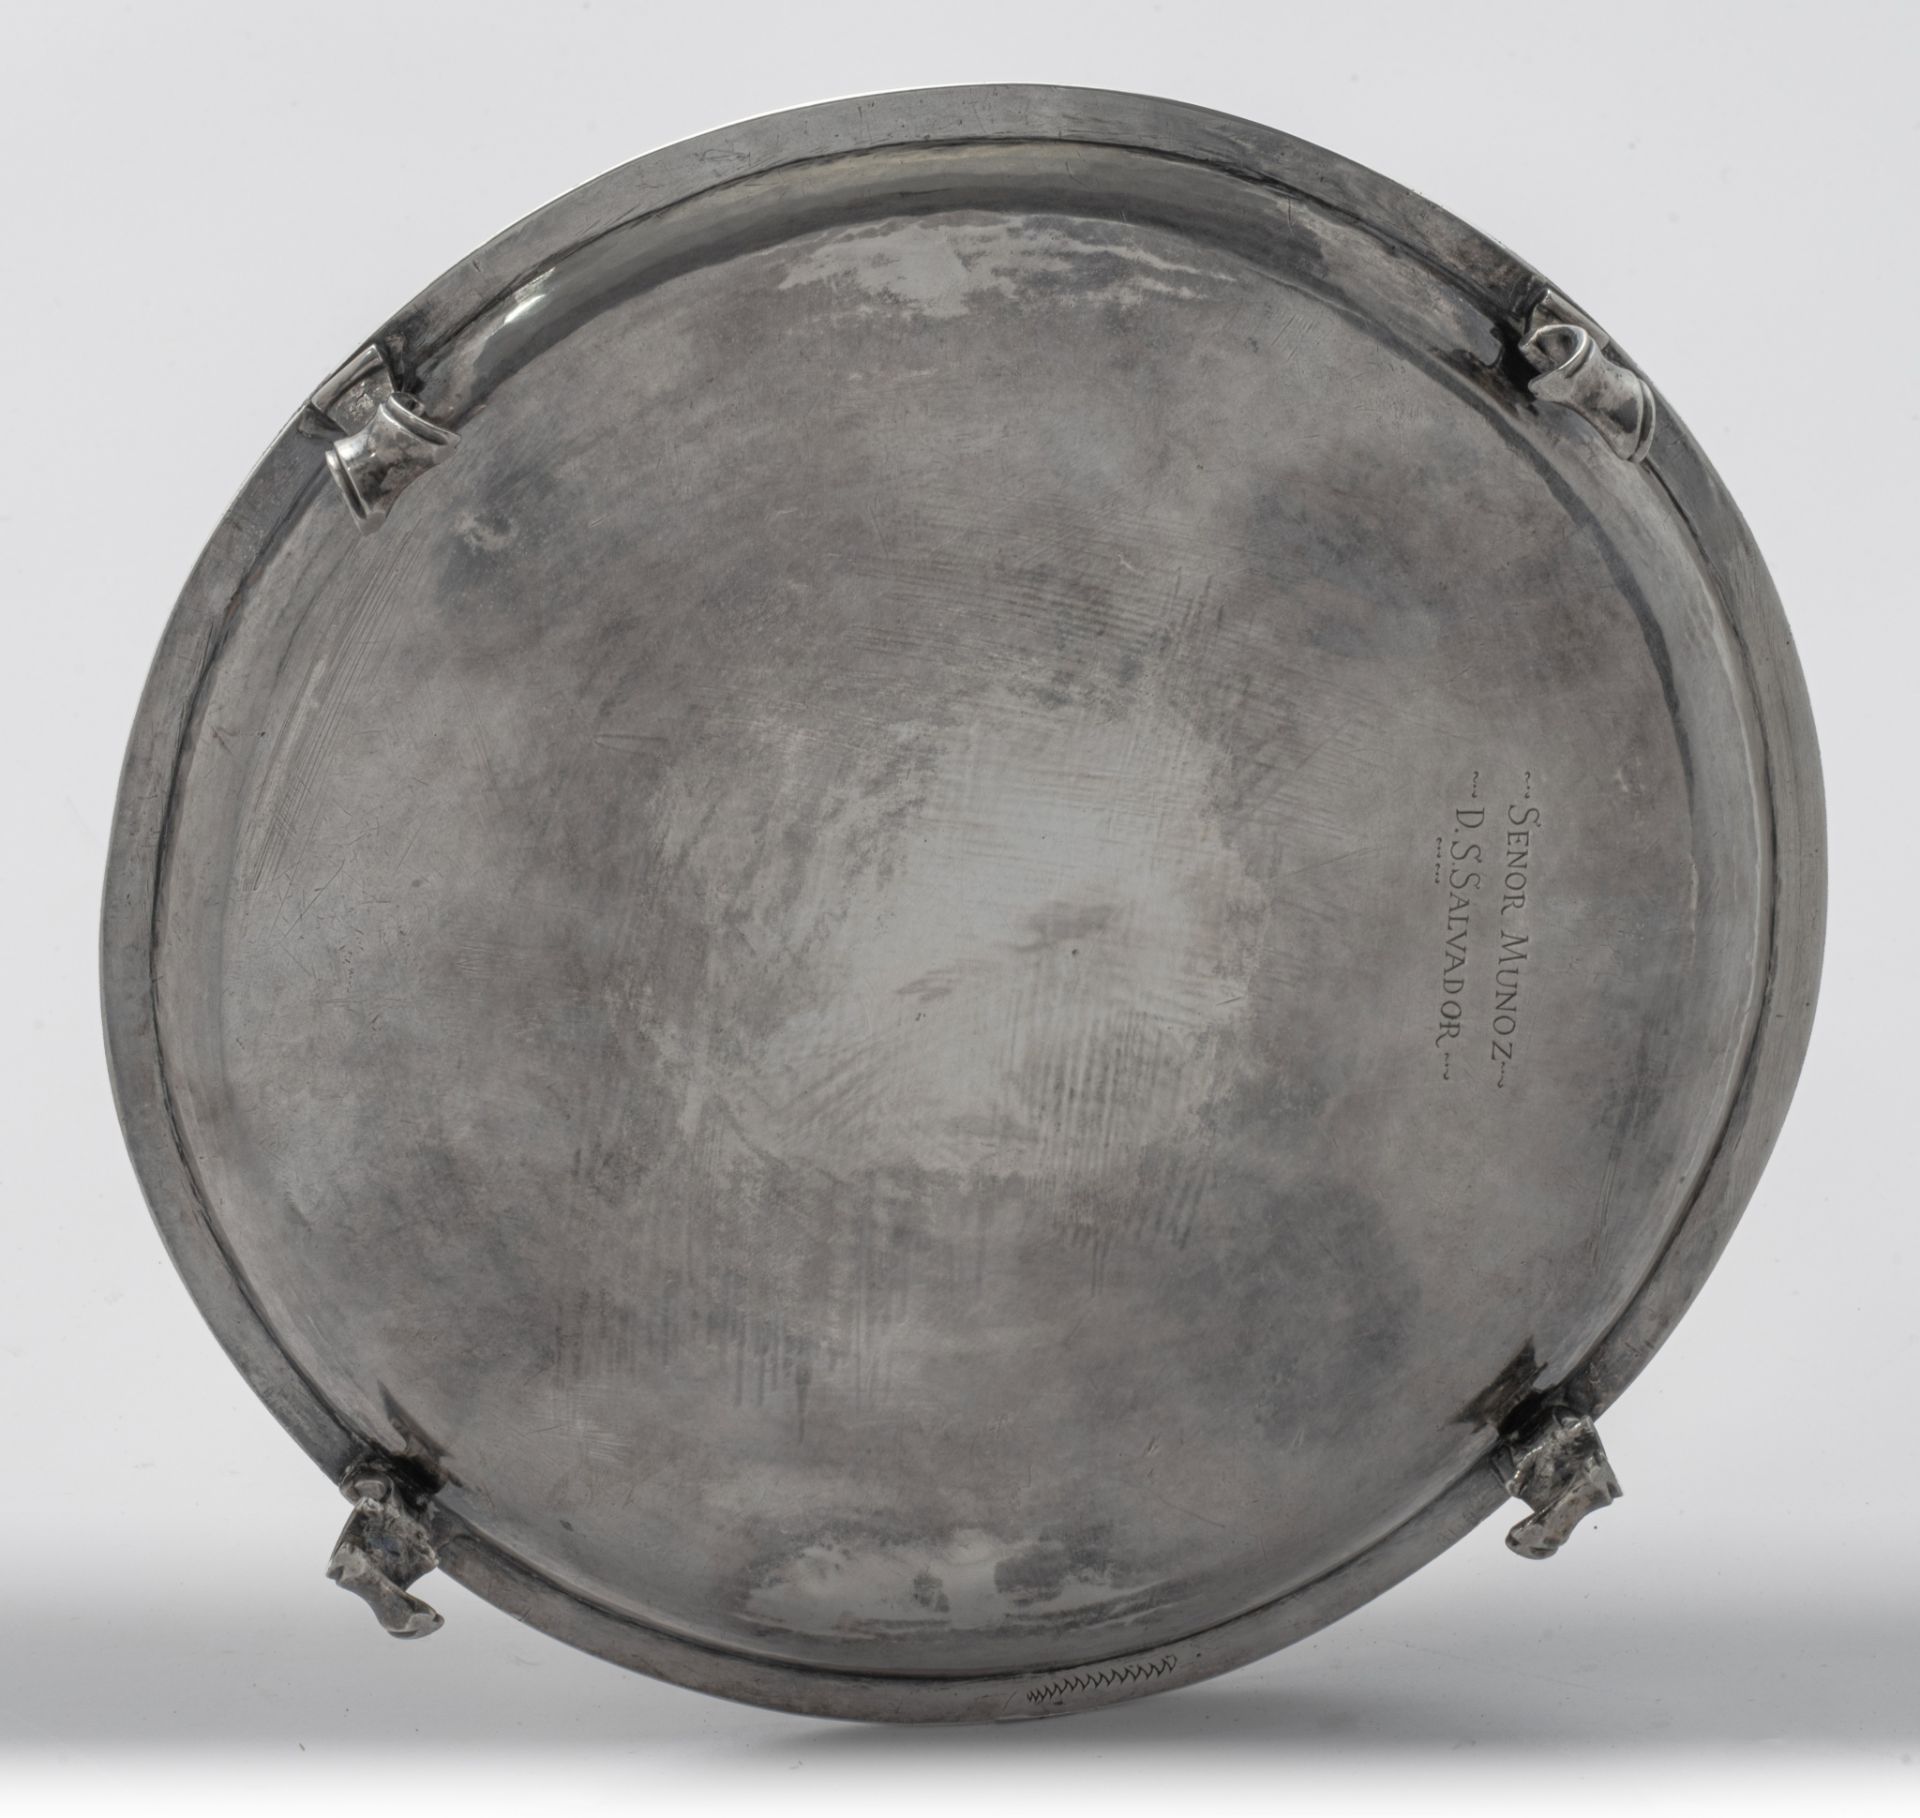 A silver salver on four volute feet, 18thC, H 4 - ¯ 27 cm - total weight: ca. 730 g - Image 5 of 6